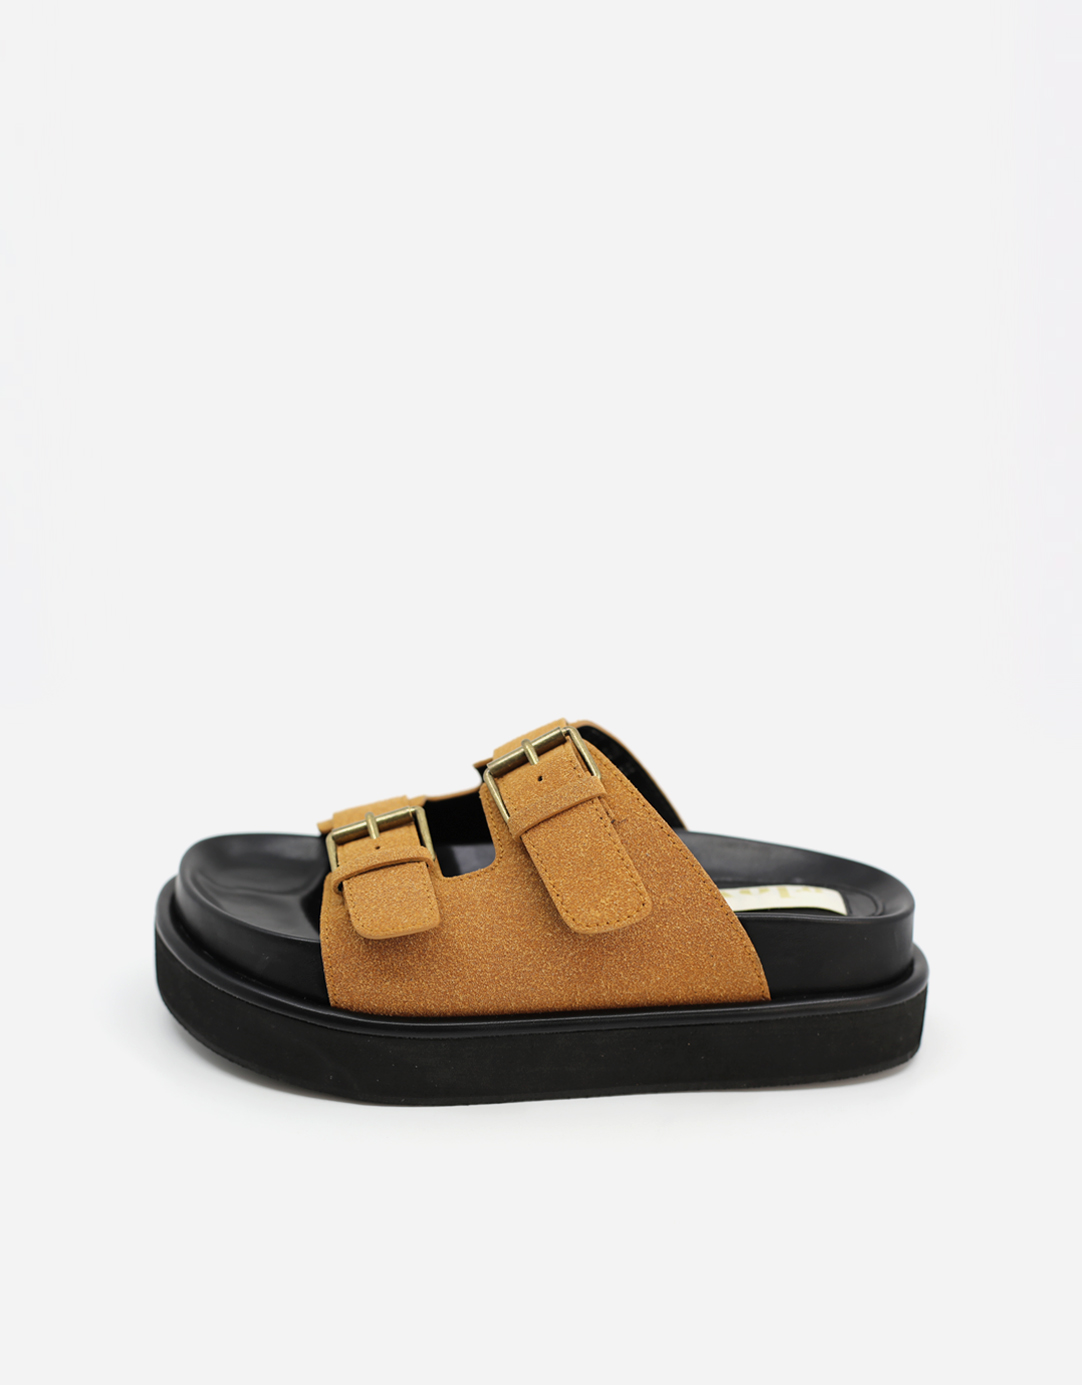 BROWN TWO BUCKLE SLIPPER